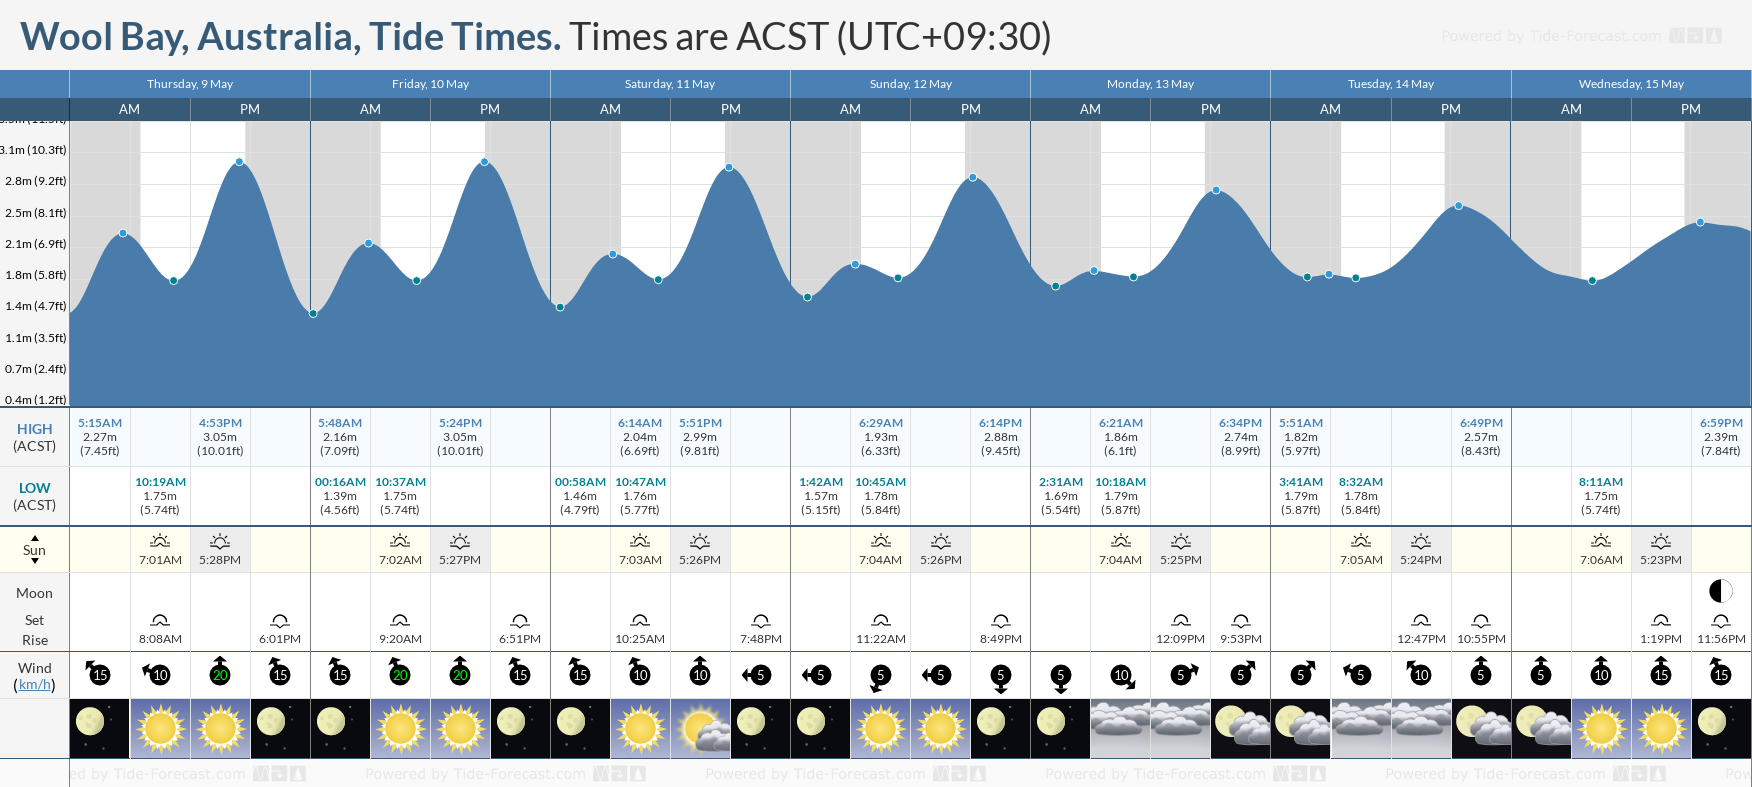 Wool Bay, Australia Tide Chart including high and low tide times for the next 7 days